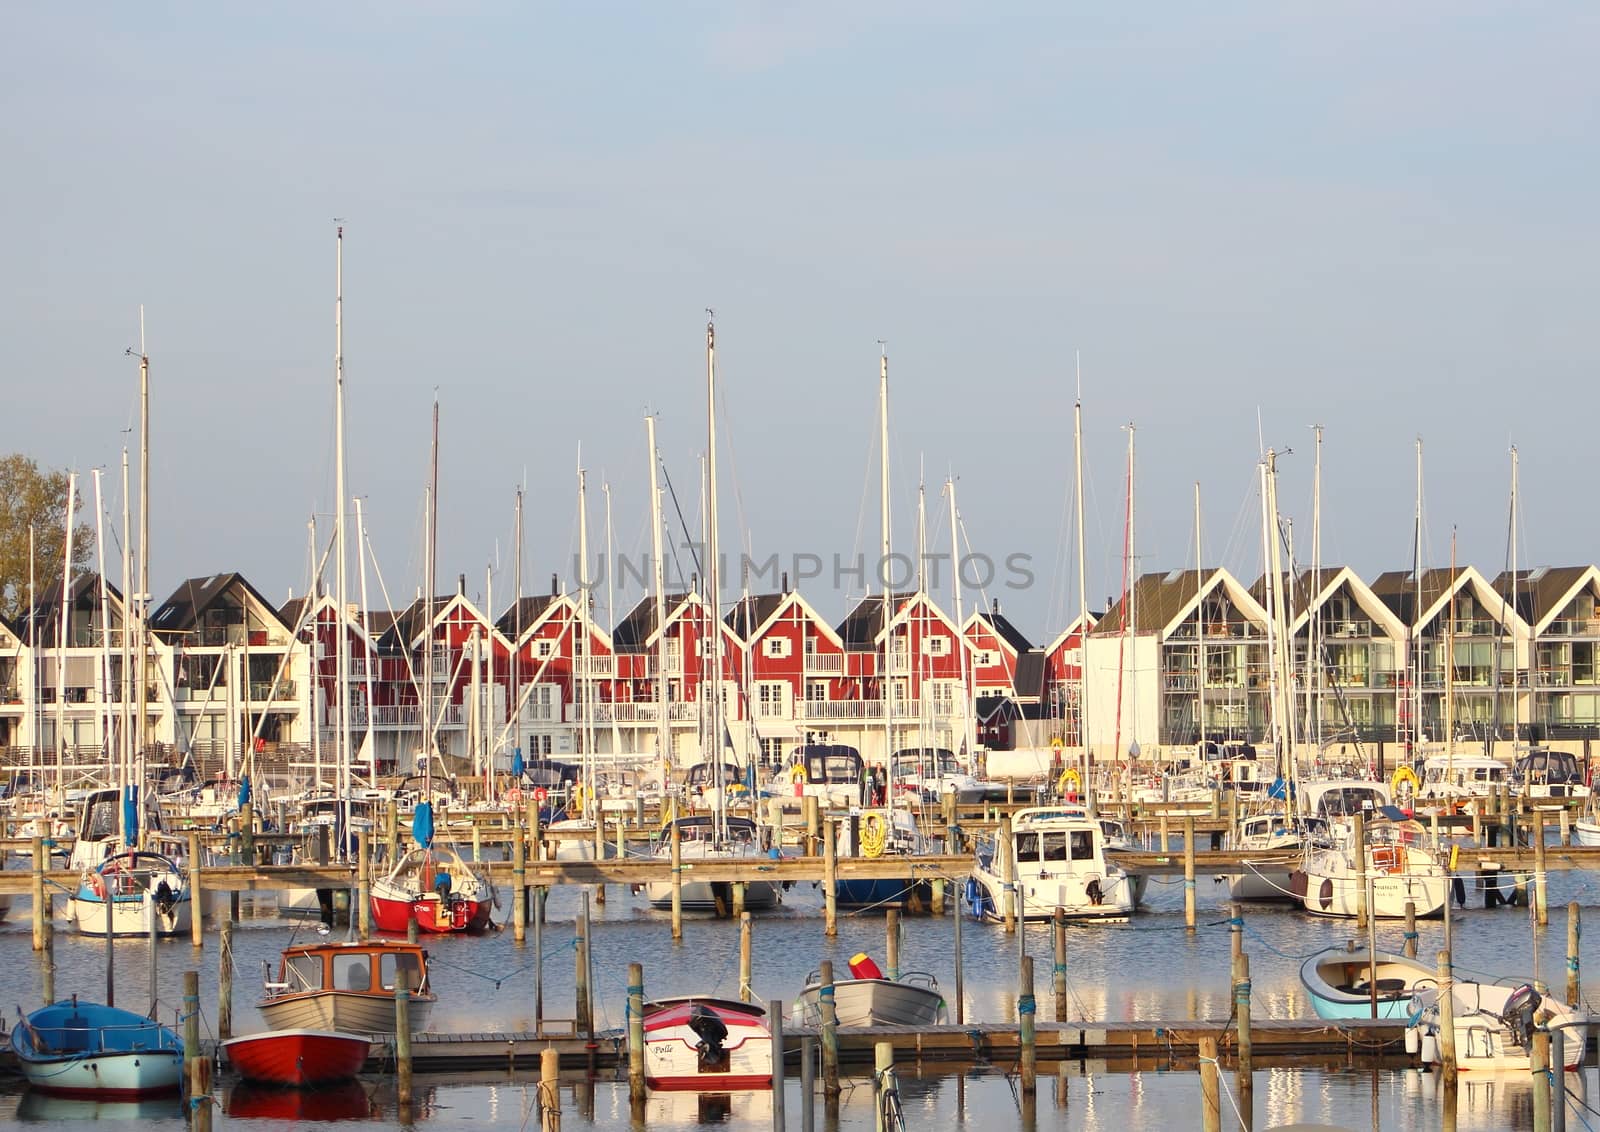 View of small yacht harbor with houses in backgound by HoleInTheBox